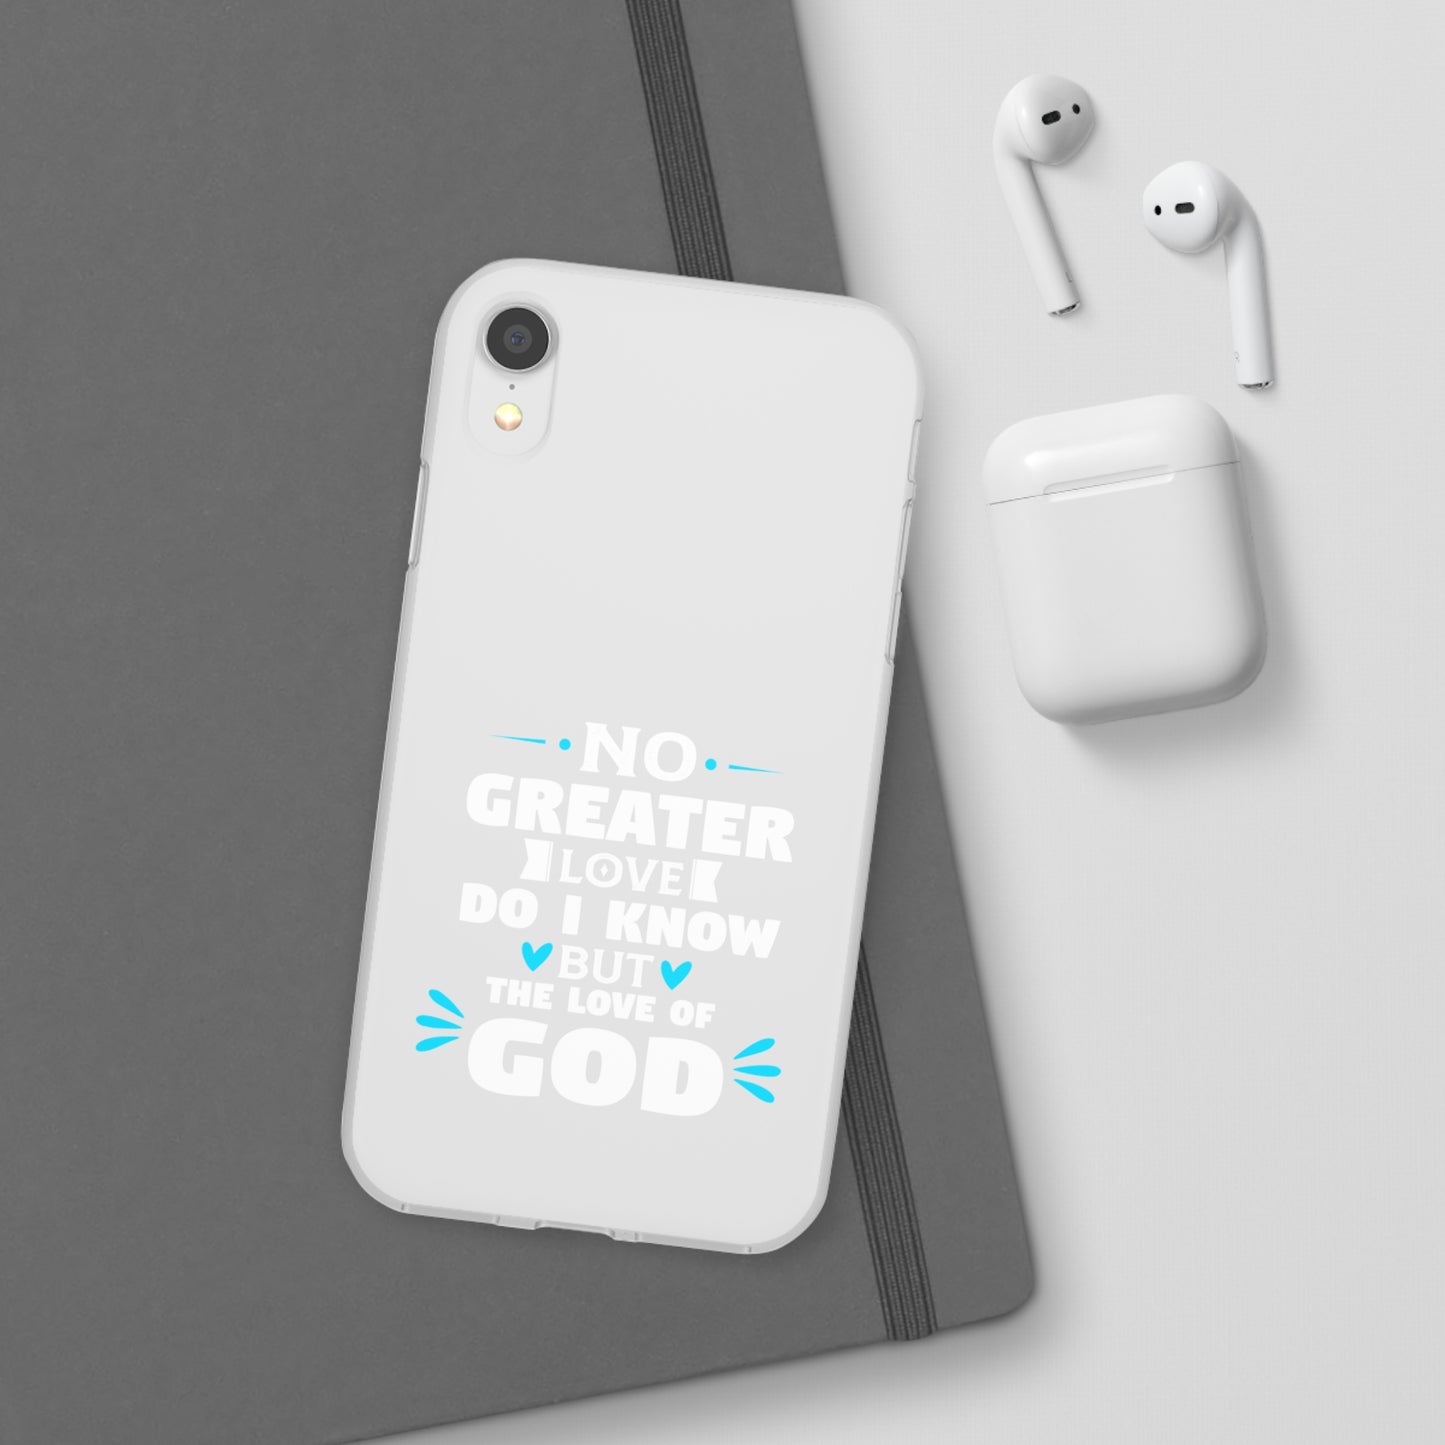 No Greater Love Do I Know But The Love Of God Flexi Phone Case